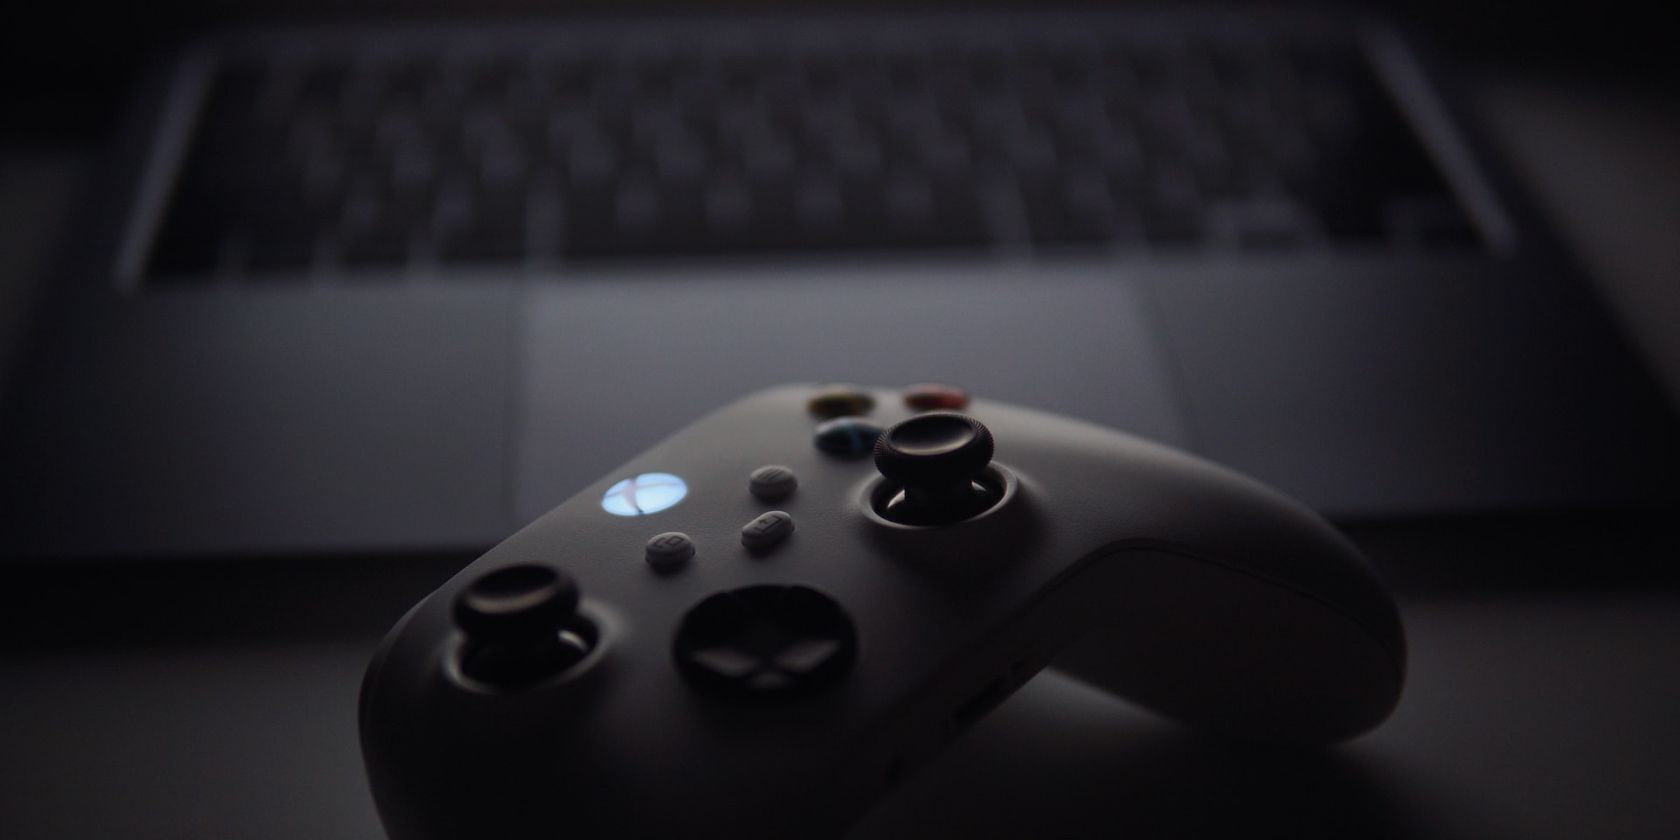 Xbox controller with a MacBook